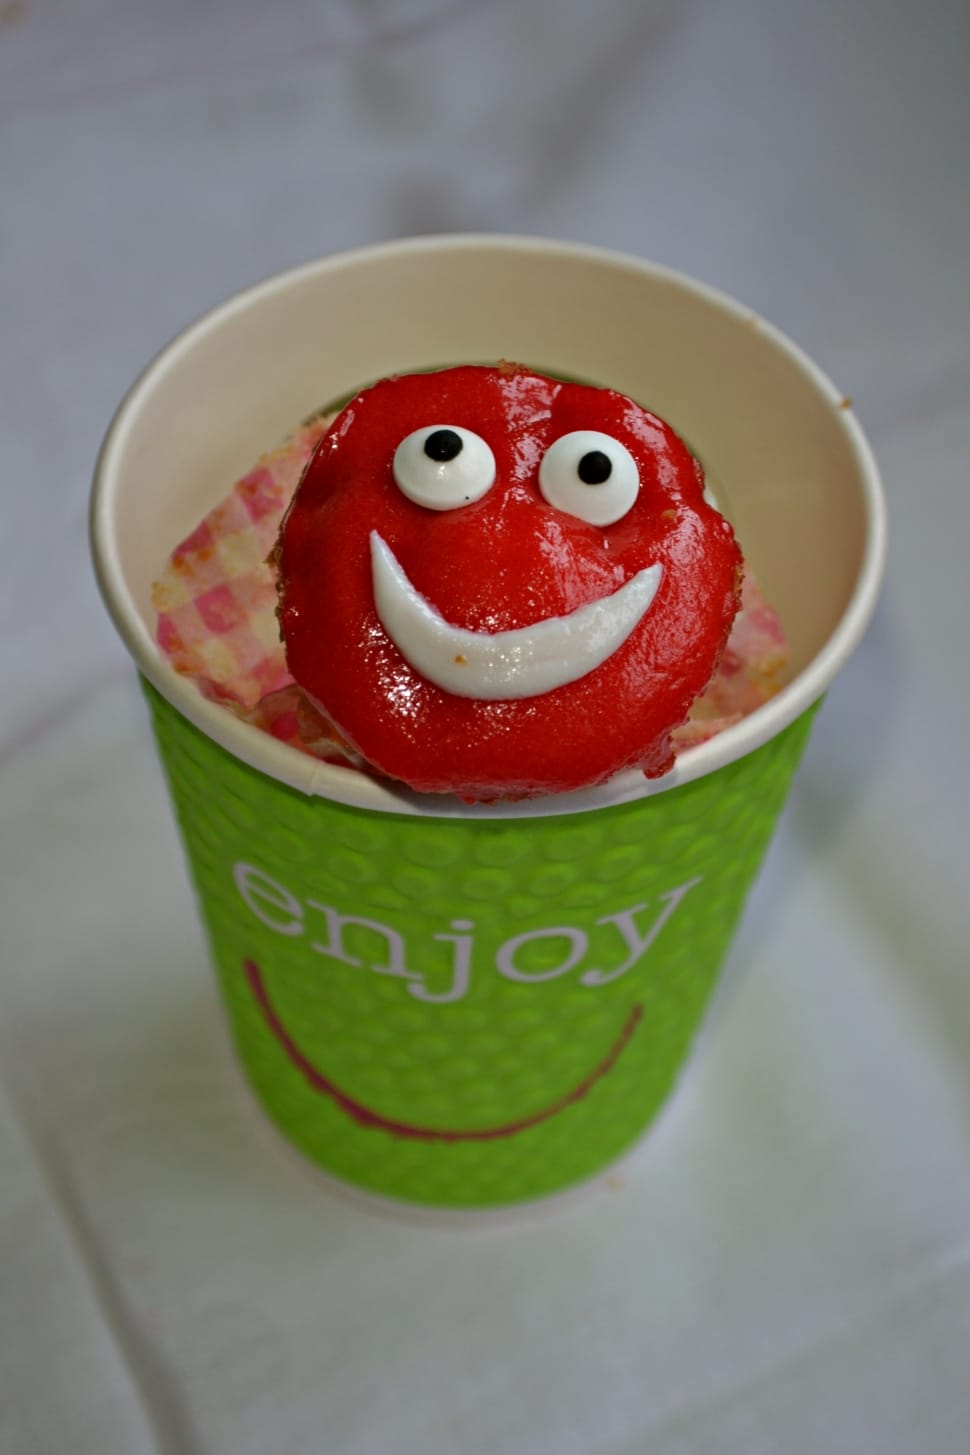 red and white smiley emoticon cupcake preview